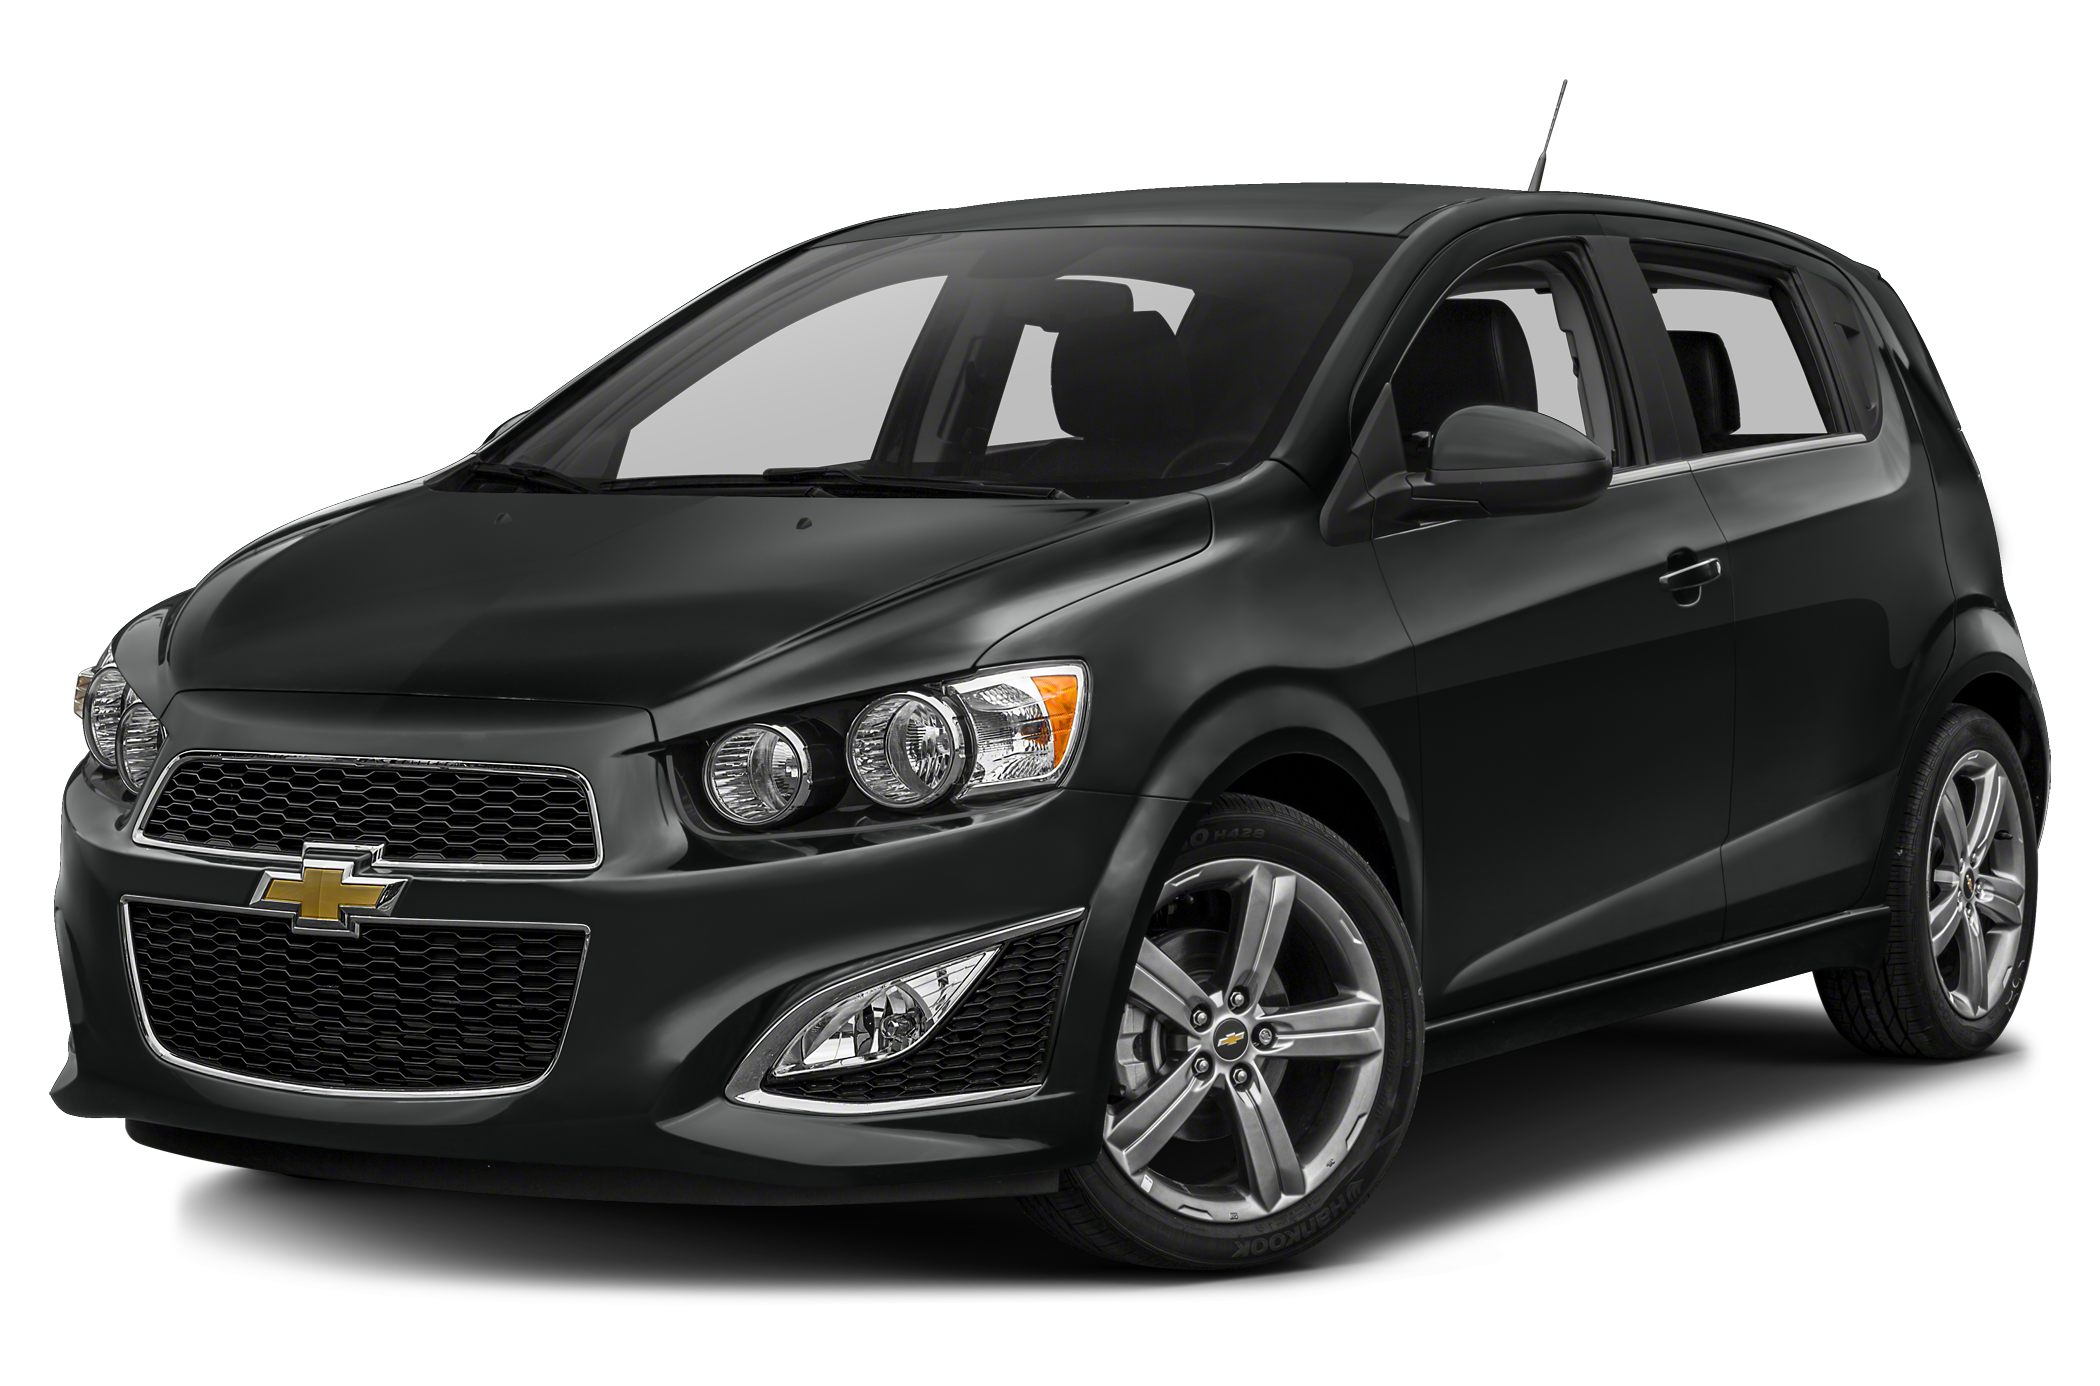 2014 Chevrolet Sonic Rs Auto 4dr Hatchback Specs And Prices